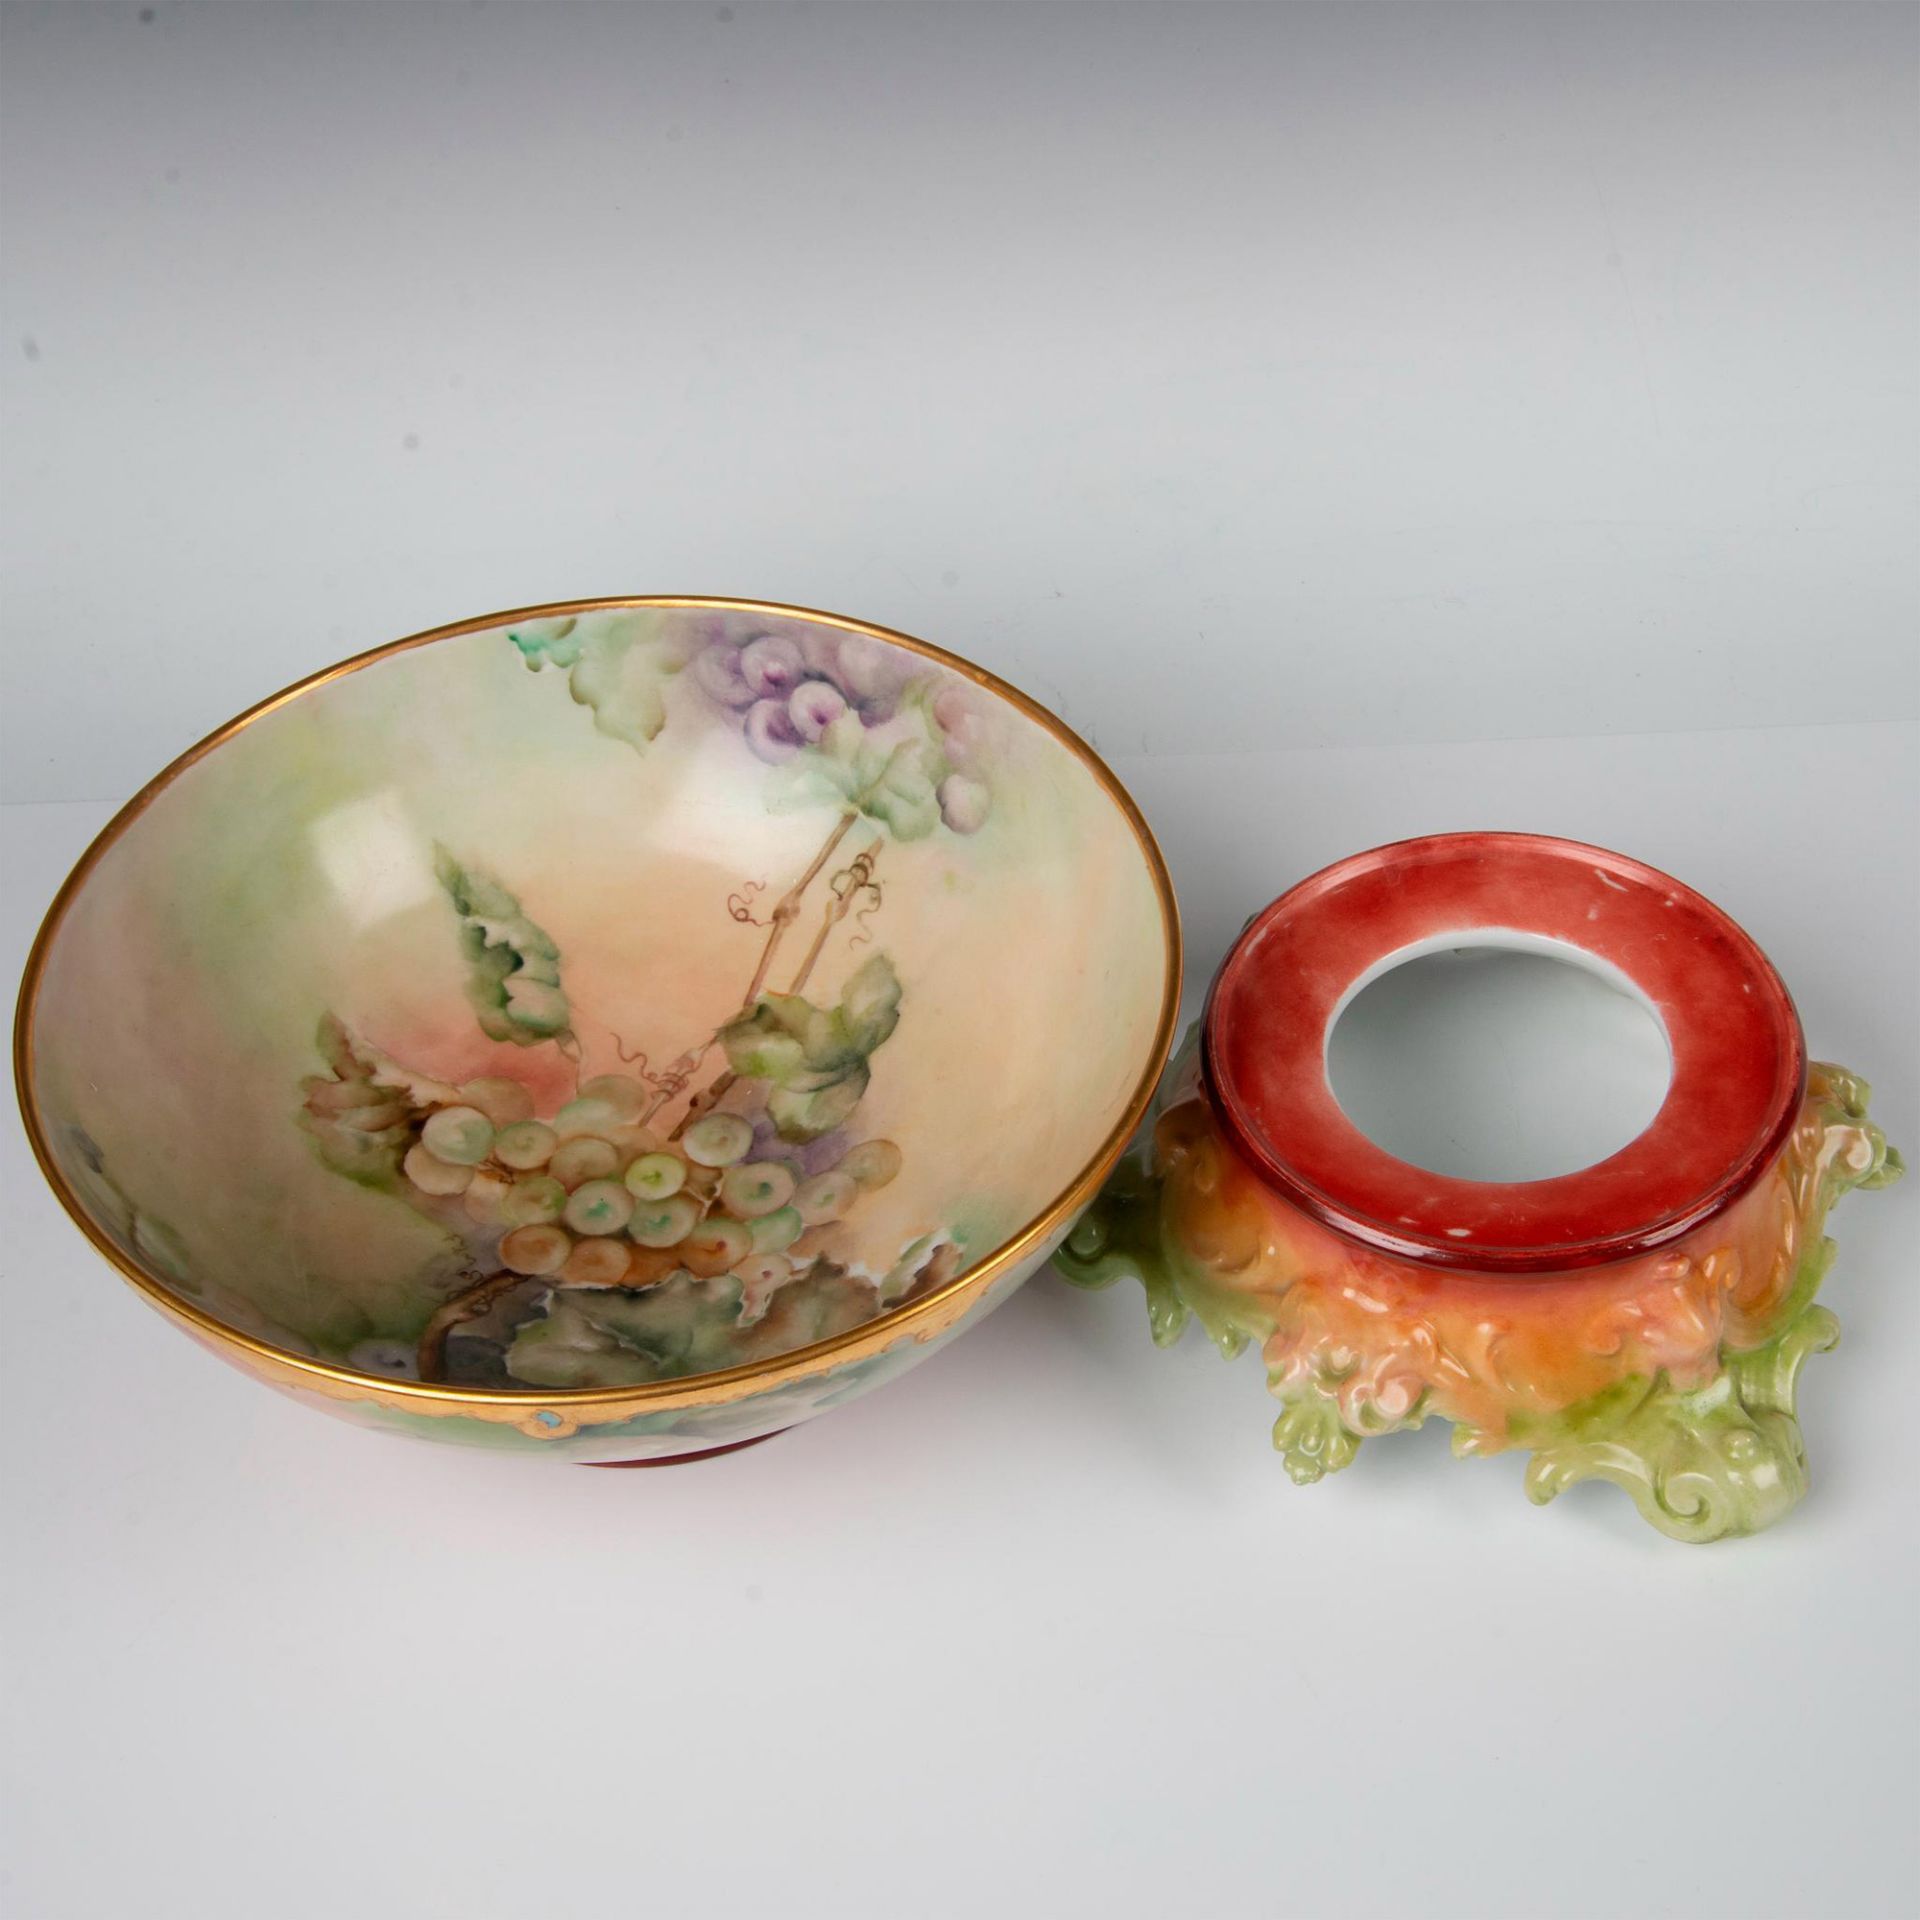 2pc Tressemanes & Vogt Limoges Hand Painted Punch Bowl with Stand - Image 5 of 8